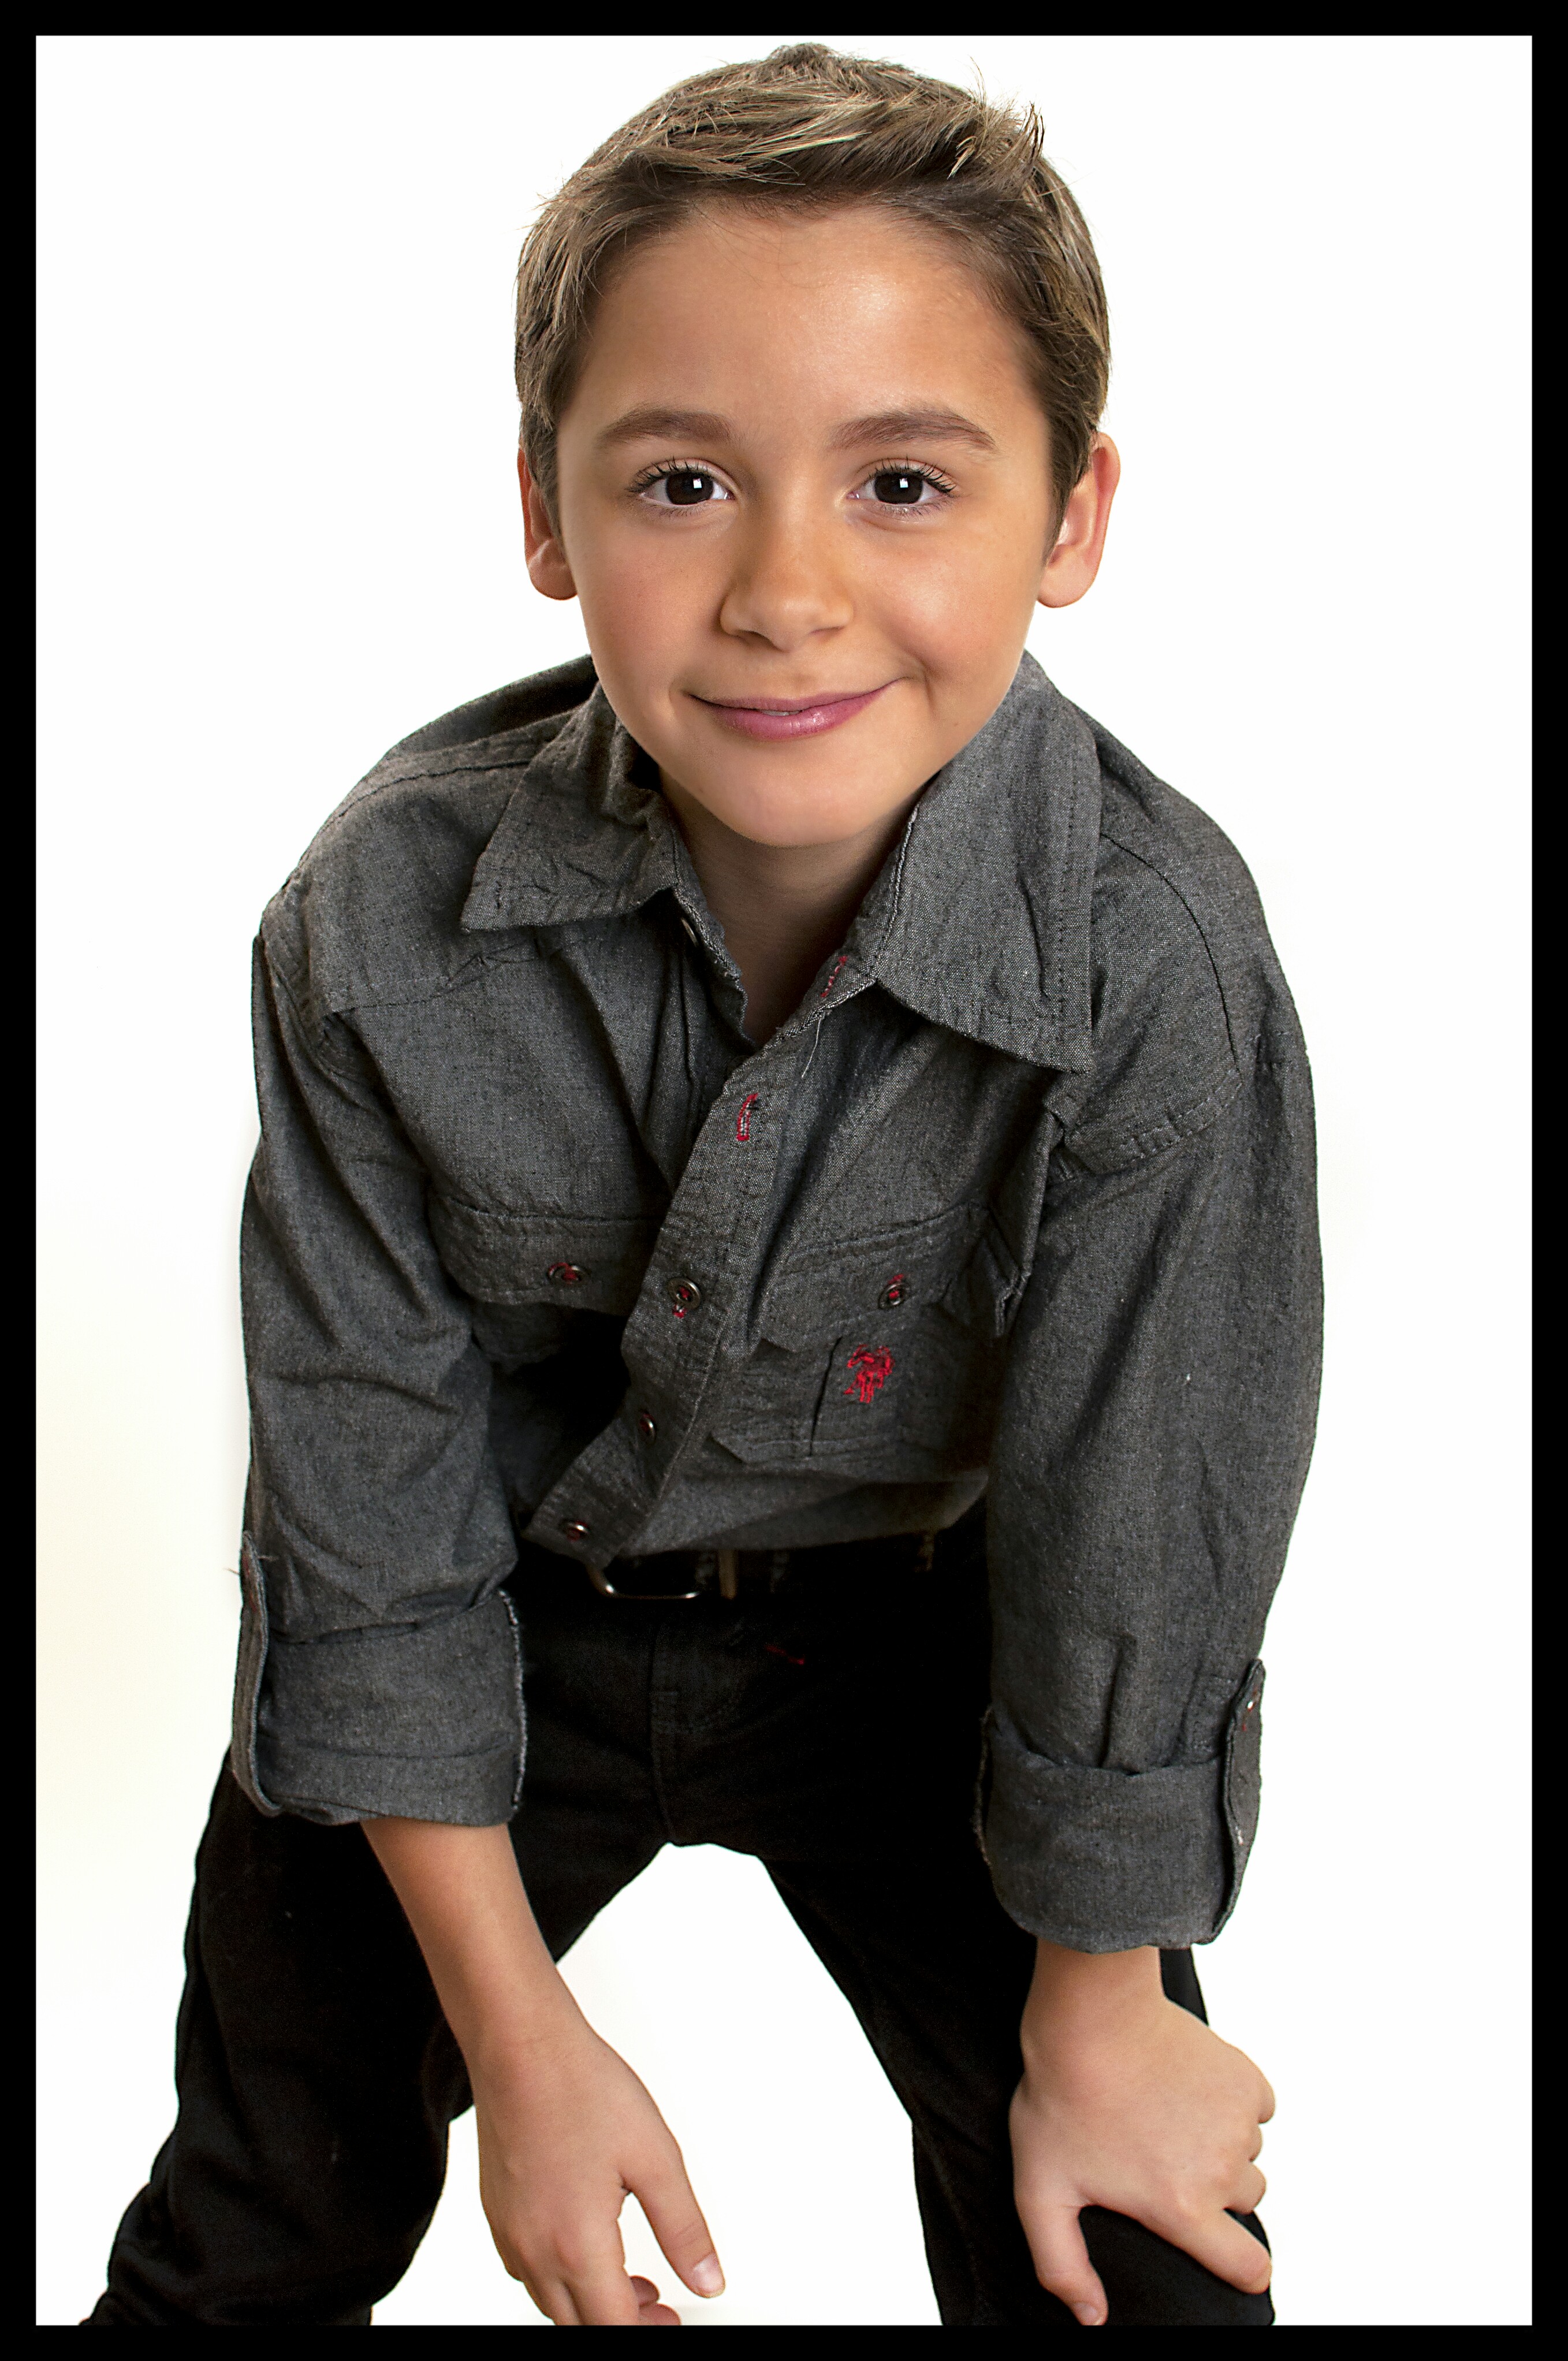 Son of CC Perkinson, Jonah Perkinson. Photo shoot for the upcoming show 'The Protege' with co-host CC Perkinson